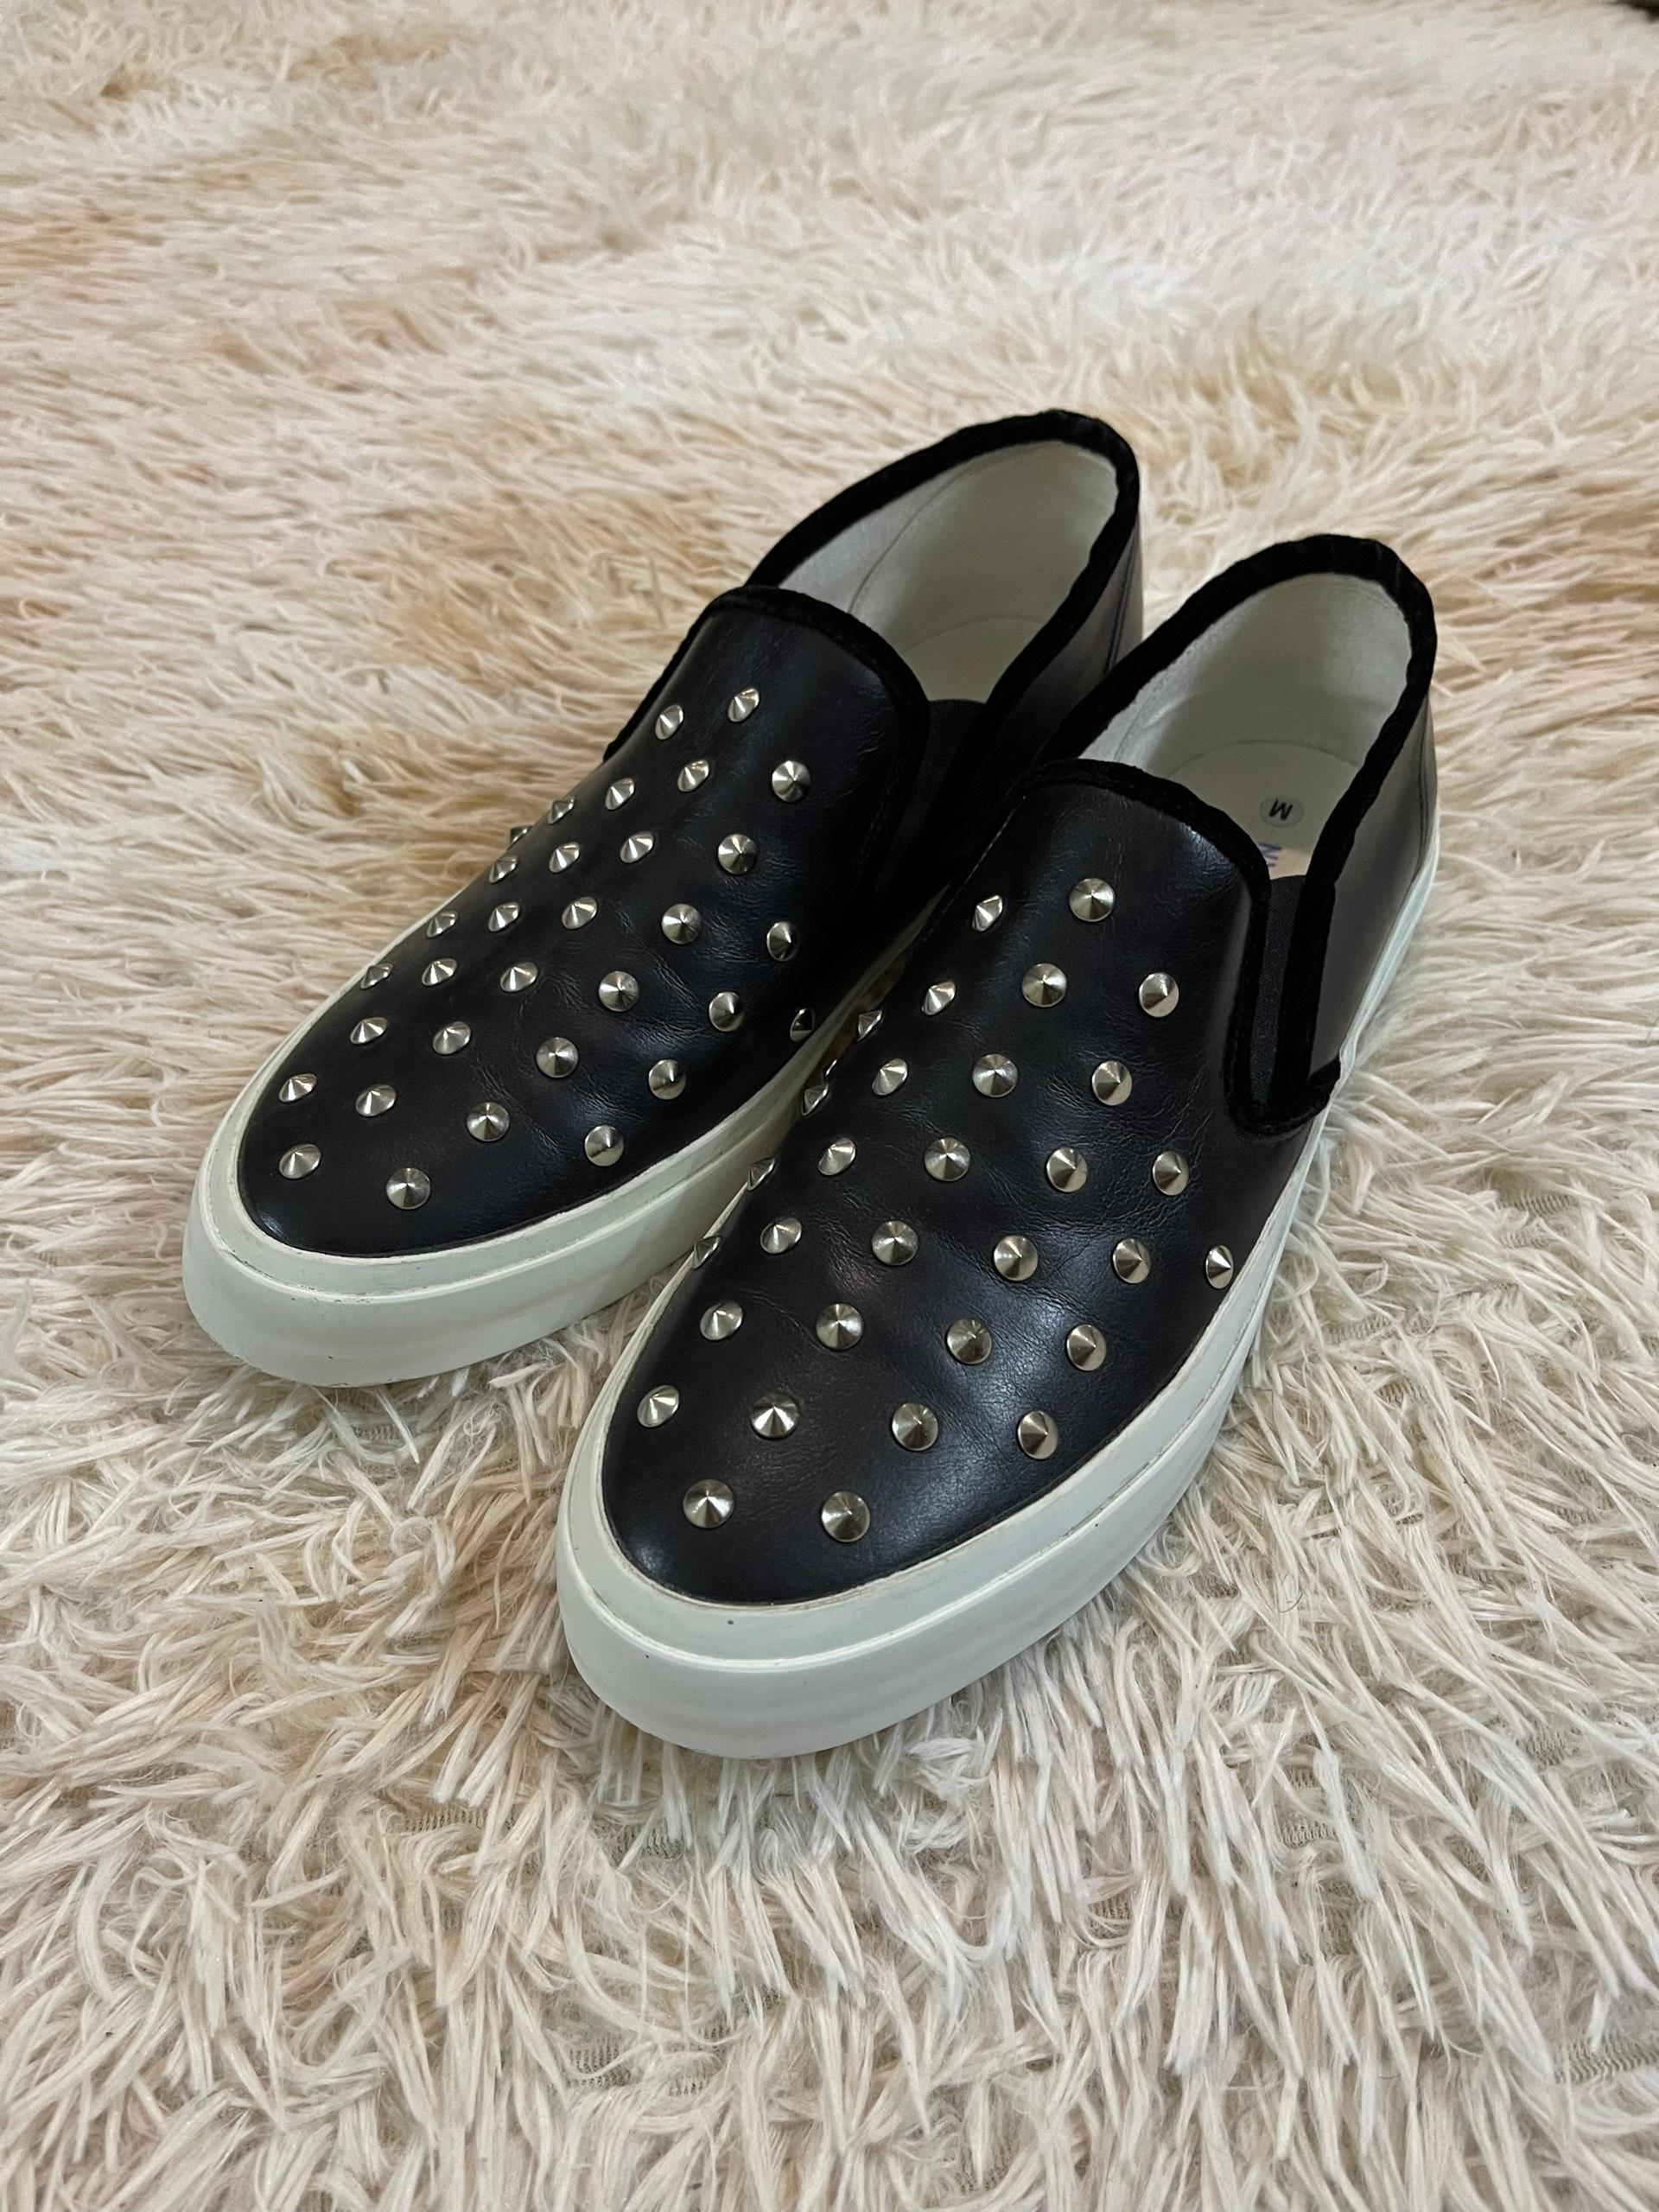 Junya Watanabe Spike Studded Slip-on Sneaker In Excellent Condition For Sale In Seattle, WA